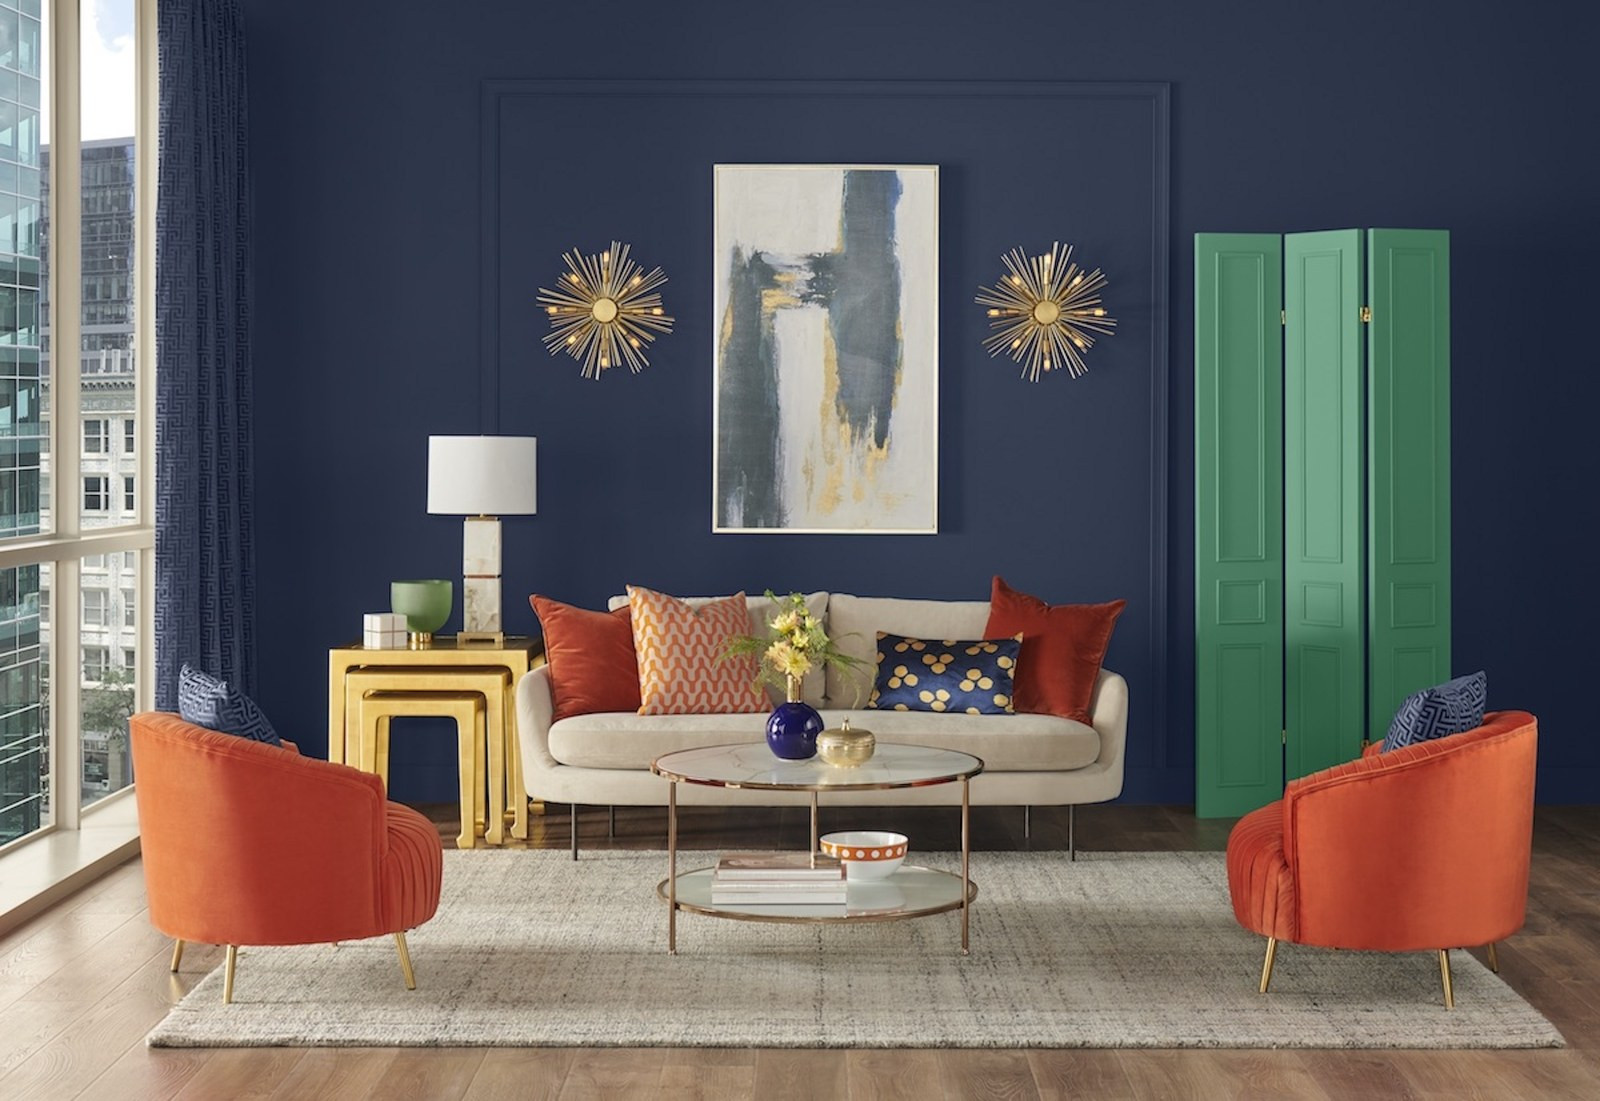 Living Room Paint Ideas 2020
 And the Sherwin Williams 2020 Color of the Year Is